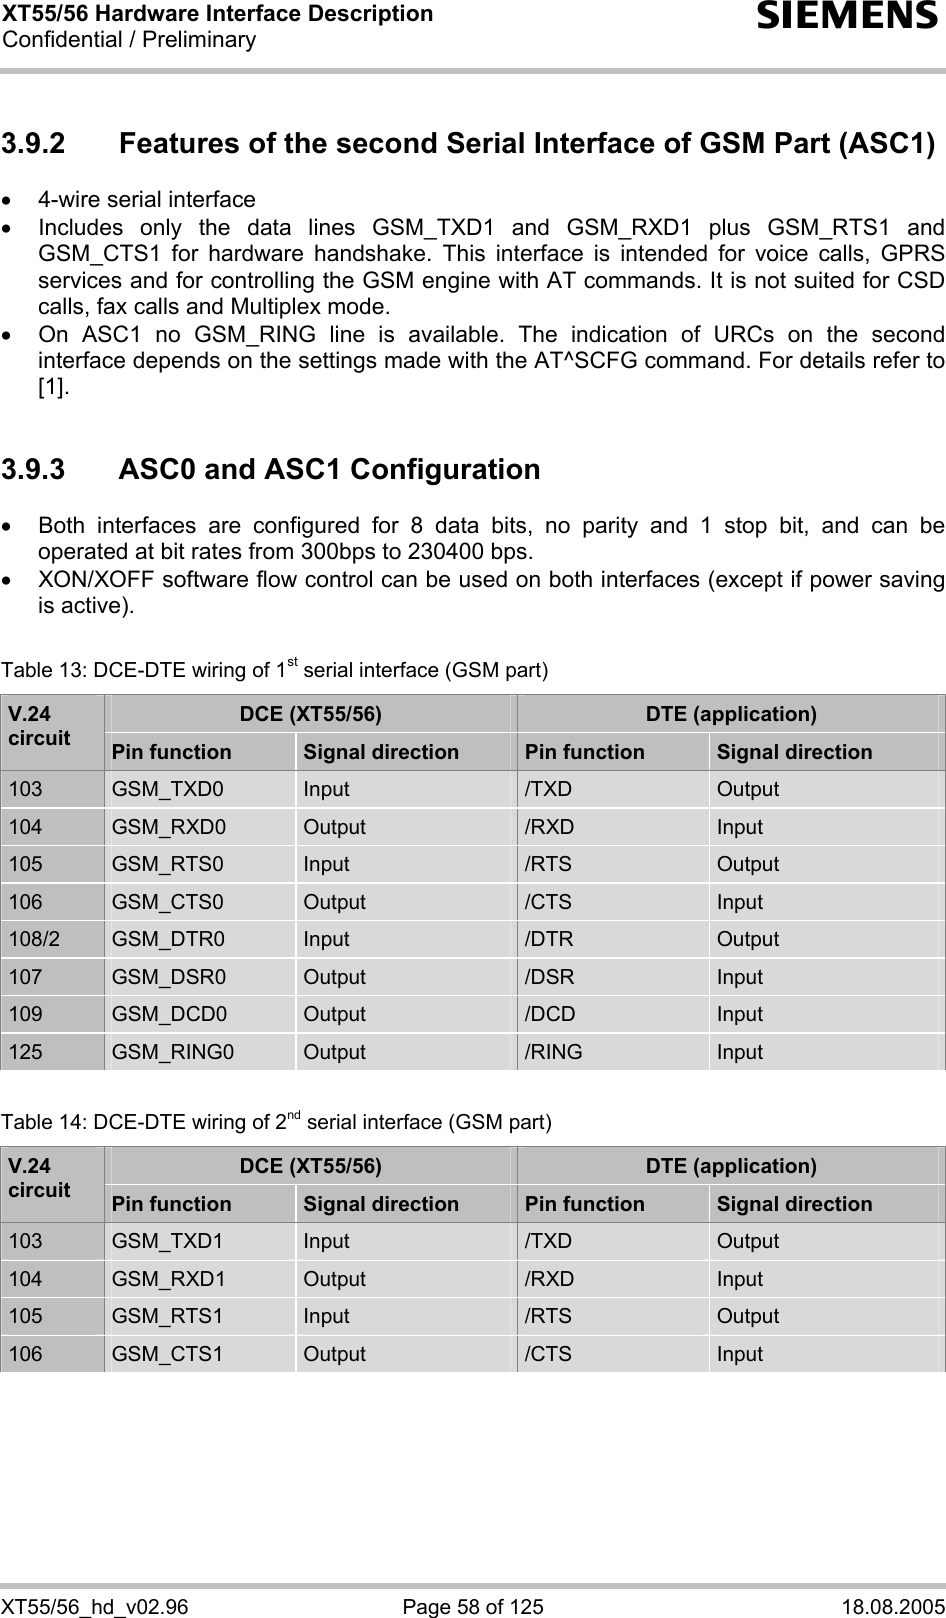 XT55/56 Hardware Interface Description Confidential / Preliminary s XT55/56_hd_v02.96  Page 58 of 125  18.08.2005 3.9.2  Features of the second Serial Interface of GSM Part (ASC1) •  4-wire serial interface •  Includes only the data lines GSM_TXD1 and GSM_RXD1 plus GSM_RTS1 and GSM_CTS1 for hardware handshake. This interface is intended for voice calls, GPRS services and for controlling the GSM engine with AT commands. It is not suited for CSD calls, fax calls and Multiplex mode.  •  On ASC1 no GSM_RING line is available. The indication of URCs on the second interface depends on the settings made with the AT^SCFG command. For details refer to [1].  3.9.3  ASC0 and ASC1 Configuration •  Both interfaces are configured for 8 data bits, no parity and 1 stop bit, and can be operated at bit rates from 300bps to 230400 bps.  •  XON/XOFF software flow control can be used on both interfaces (except if power saving is active).  Table 13: DCE-DTE wiring of 1st serial interface (GSM part) DCE (XT55/56)  DTE (application) V.24 circuit  Pin function  Signal direction  Pin function  Signal direction 103  GSM_TXD0  Input  /TXD  Output 104  GSM_RXD0  Output  /RXD  Input 105  GSM_RTS0  Input  /RTS  Output 106  GSM_CTS0  Output  /CTS  Input 108/2  GSM_DTR0  Input  /DTR  Output 107  GSM_DSR0  Output  /DSR  Input 109  GSM_DCD0  Output  /DCD  Input 125  GSM_RING0  Output  /RING  Input  Table 14: DCE-DTE wiring of 2nd serial interface (GSM part) DCE (XT55/56)  DTE (application) V.24 circuit  Pin function  Signal direction  Pin function  Signal direction 103  GSM_TXD1  Input  /TXD  Output 104  GSM_RXD1  Output  /RXD  Input 105  GSM_RTS1  Input  /RTS  Output 106  GSM_CTS1  Output  /CTS  Input    